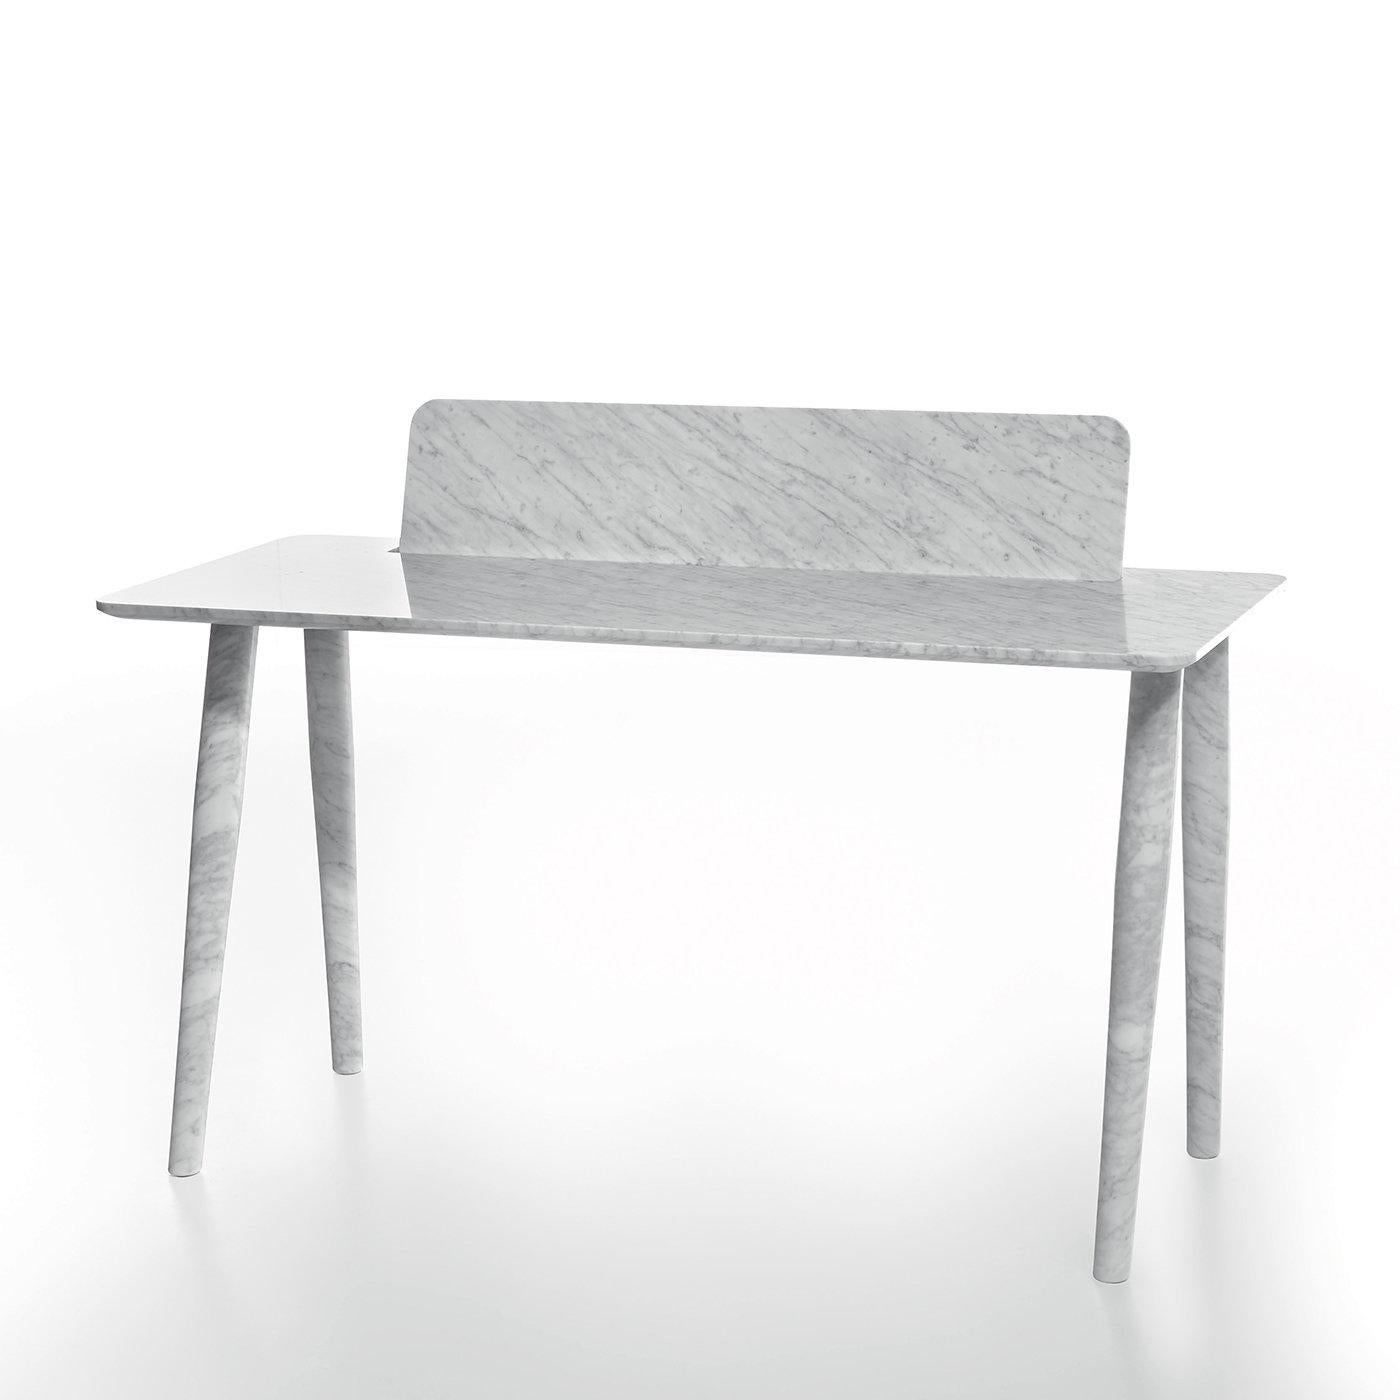 Writing desk available in white Carrara marble, black Marquina marble and on request in other types of stones.